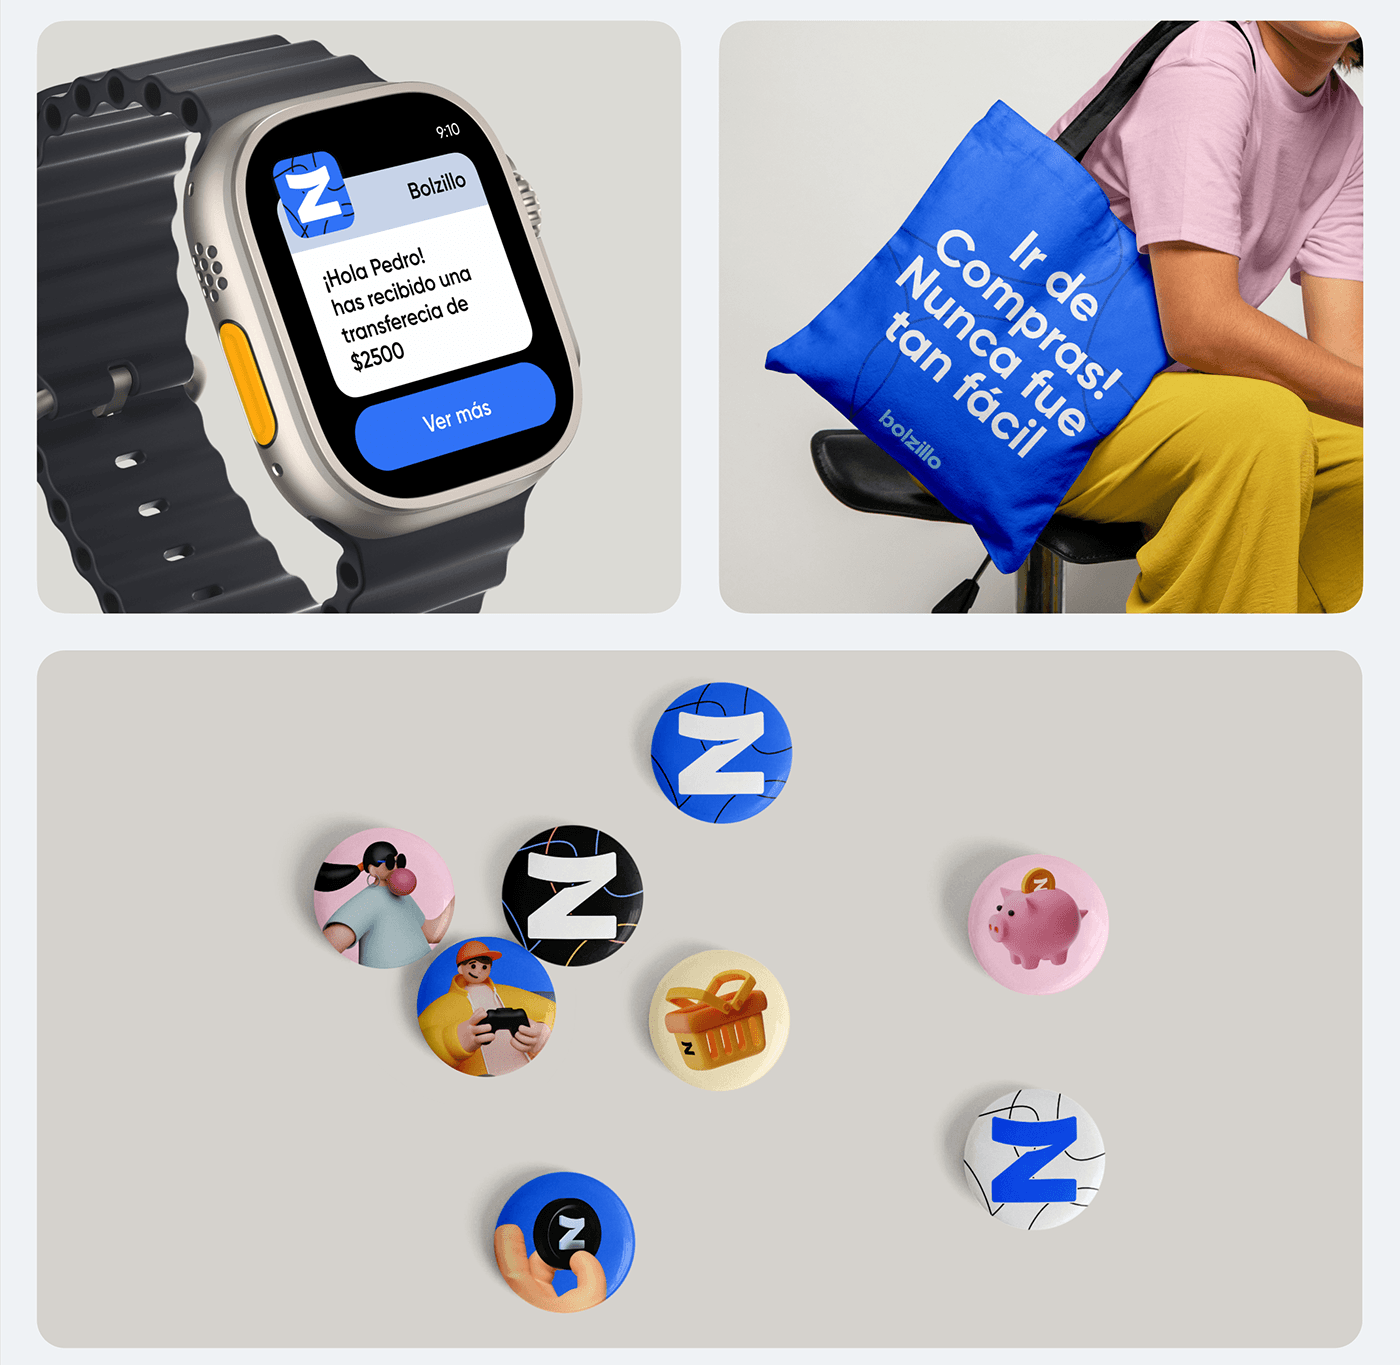 Bolzillo app UI on smartwatch, branded tote bag, and branded button badges.